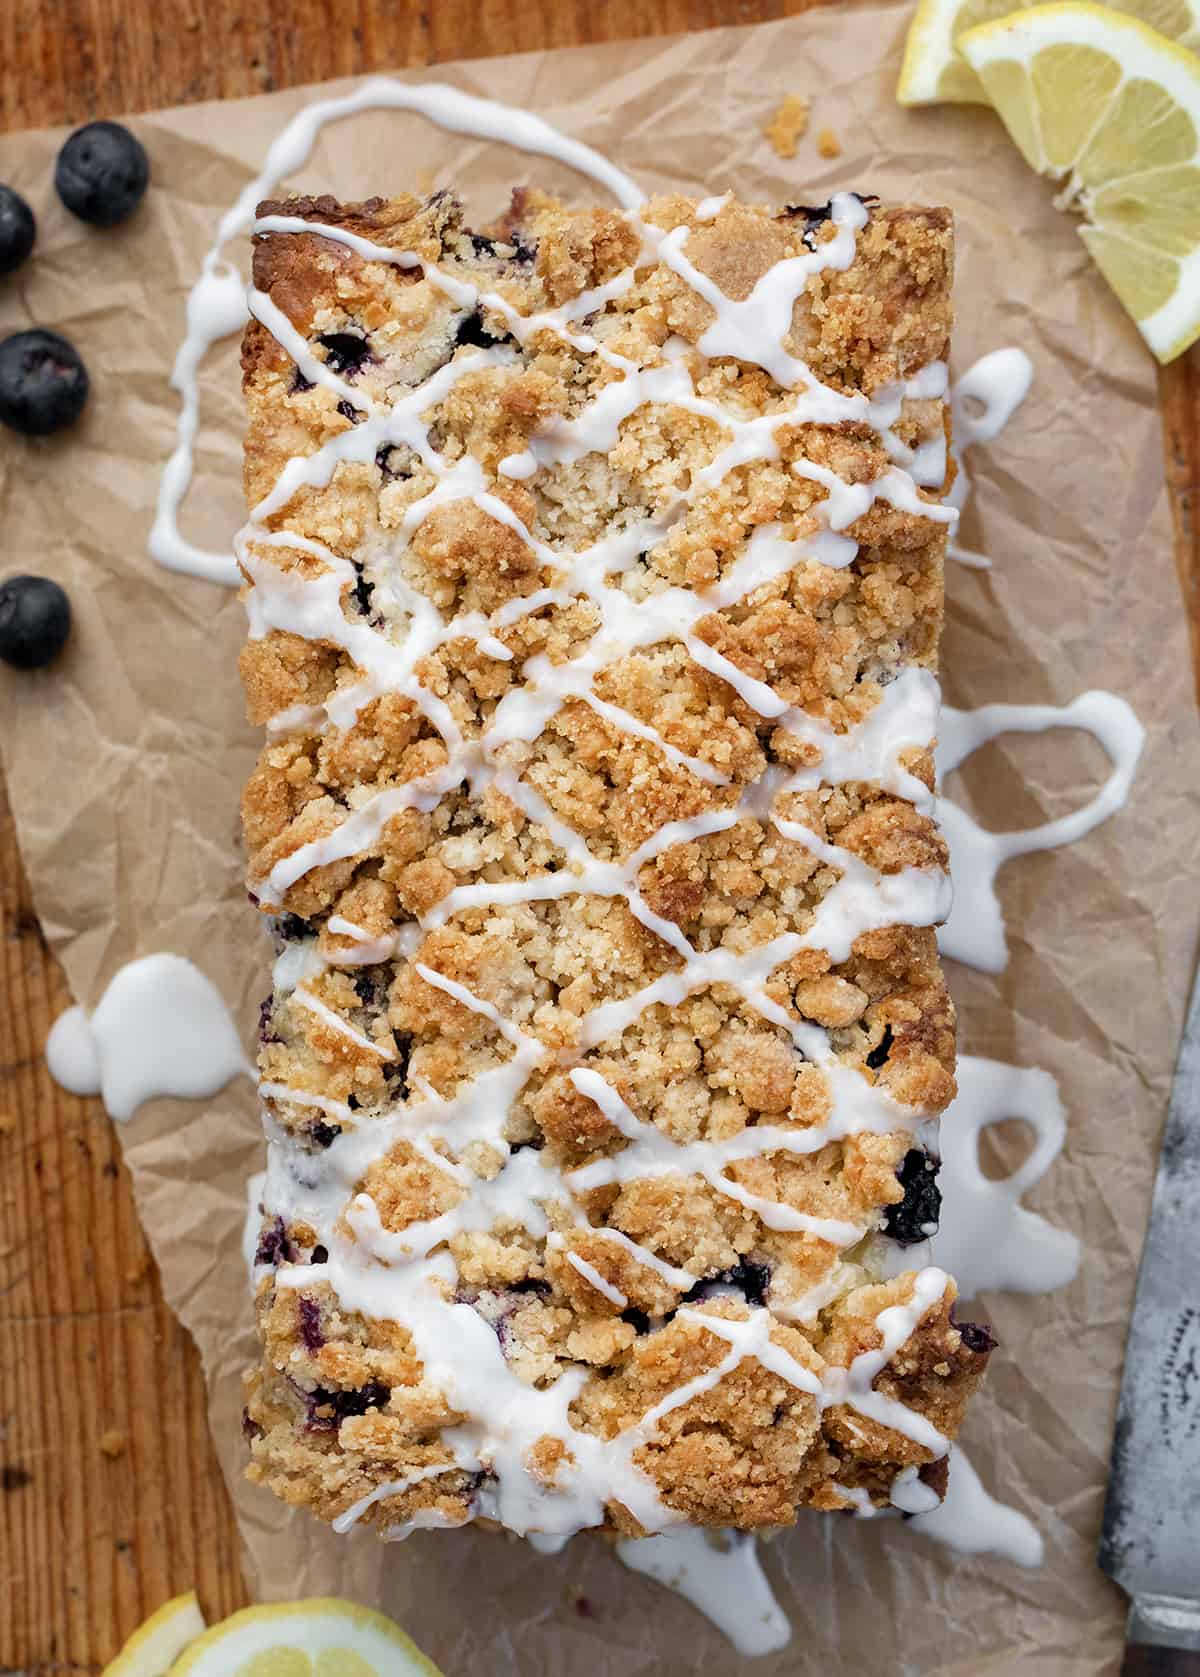 Blueberry Lemon Loaf on a Cutting Board Covered in Glaze Just like Copycat Costco Recipe.